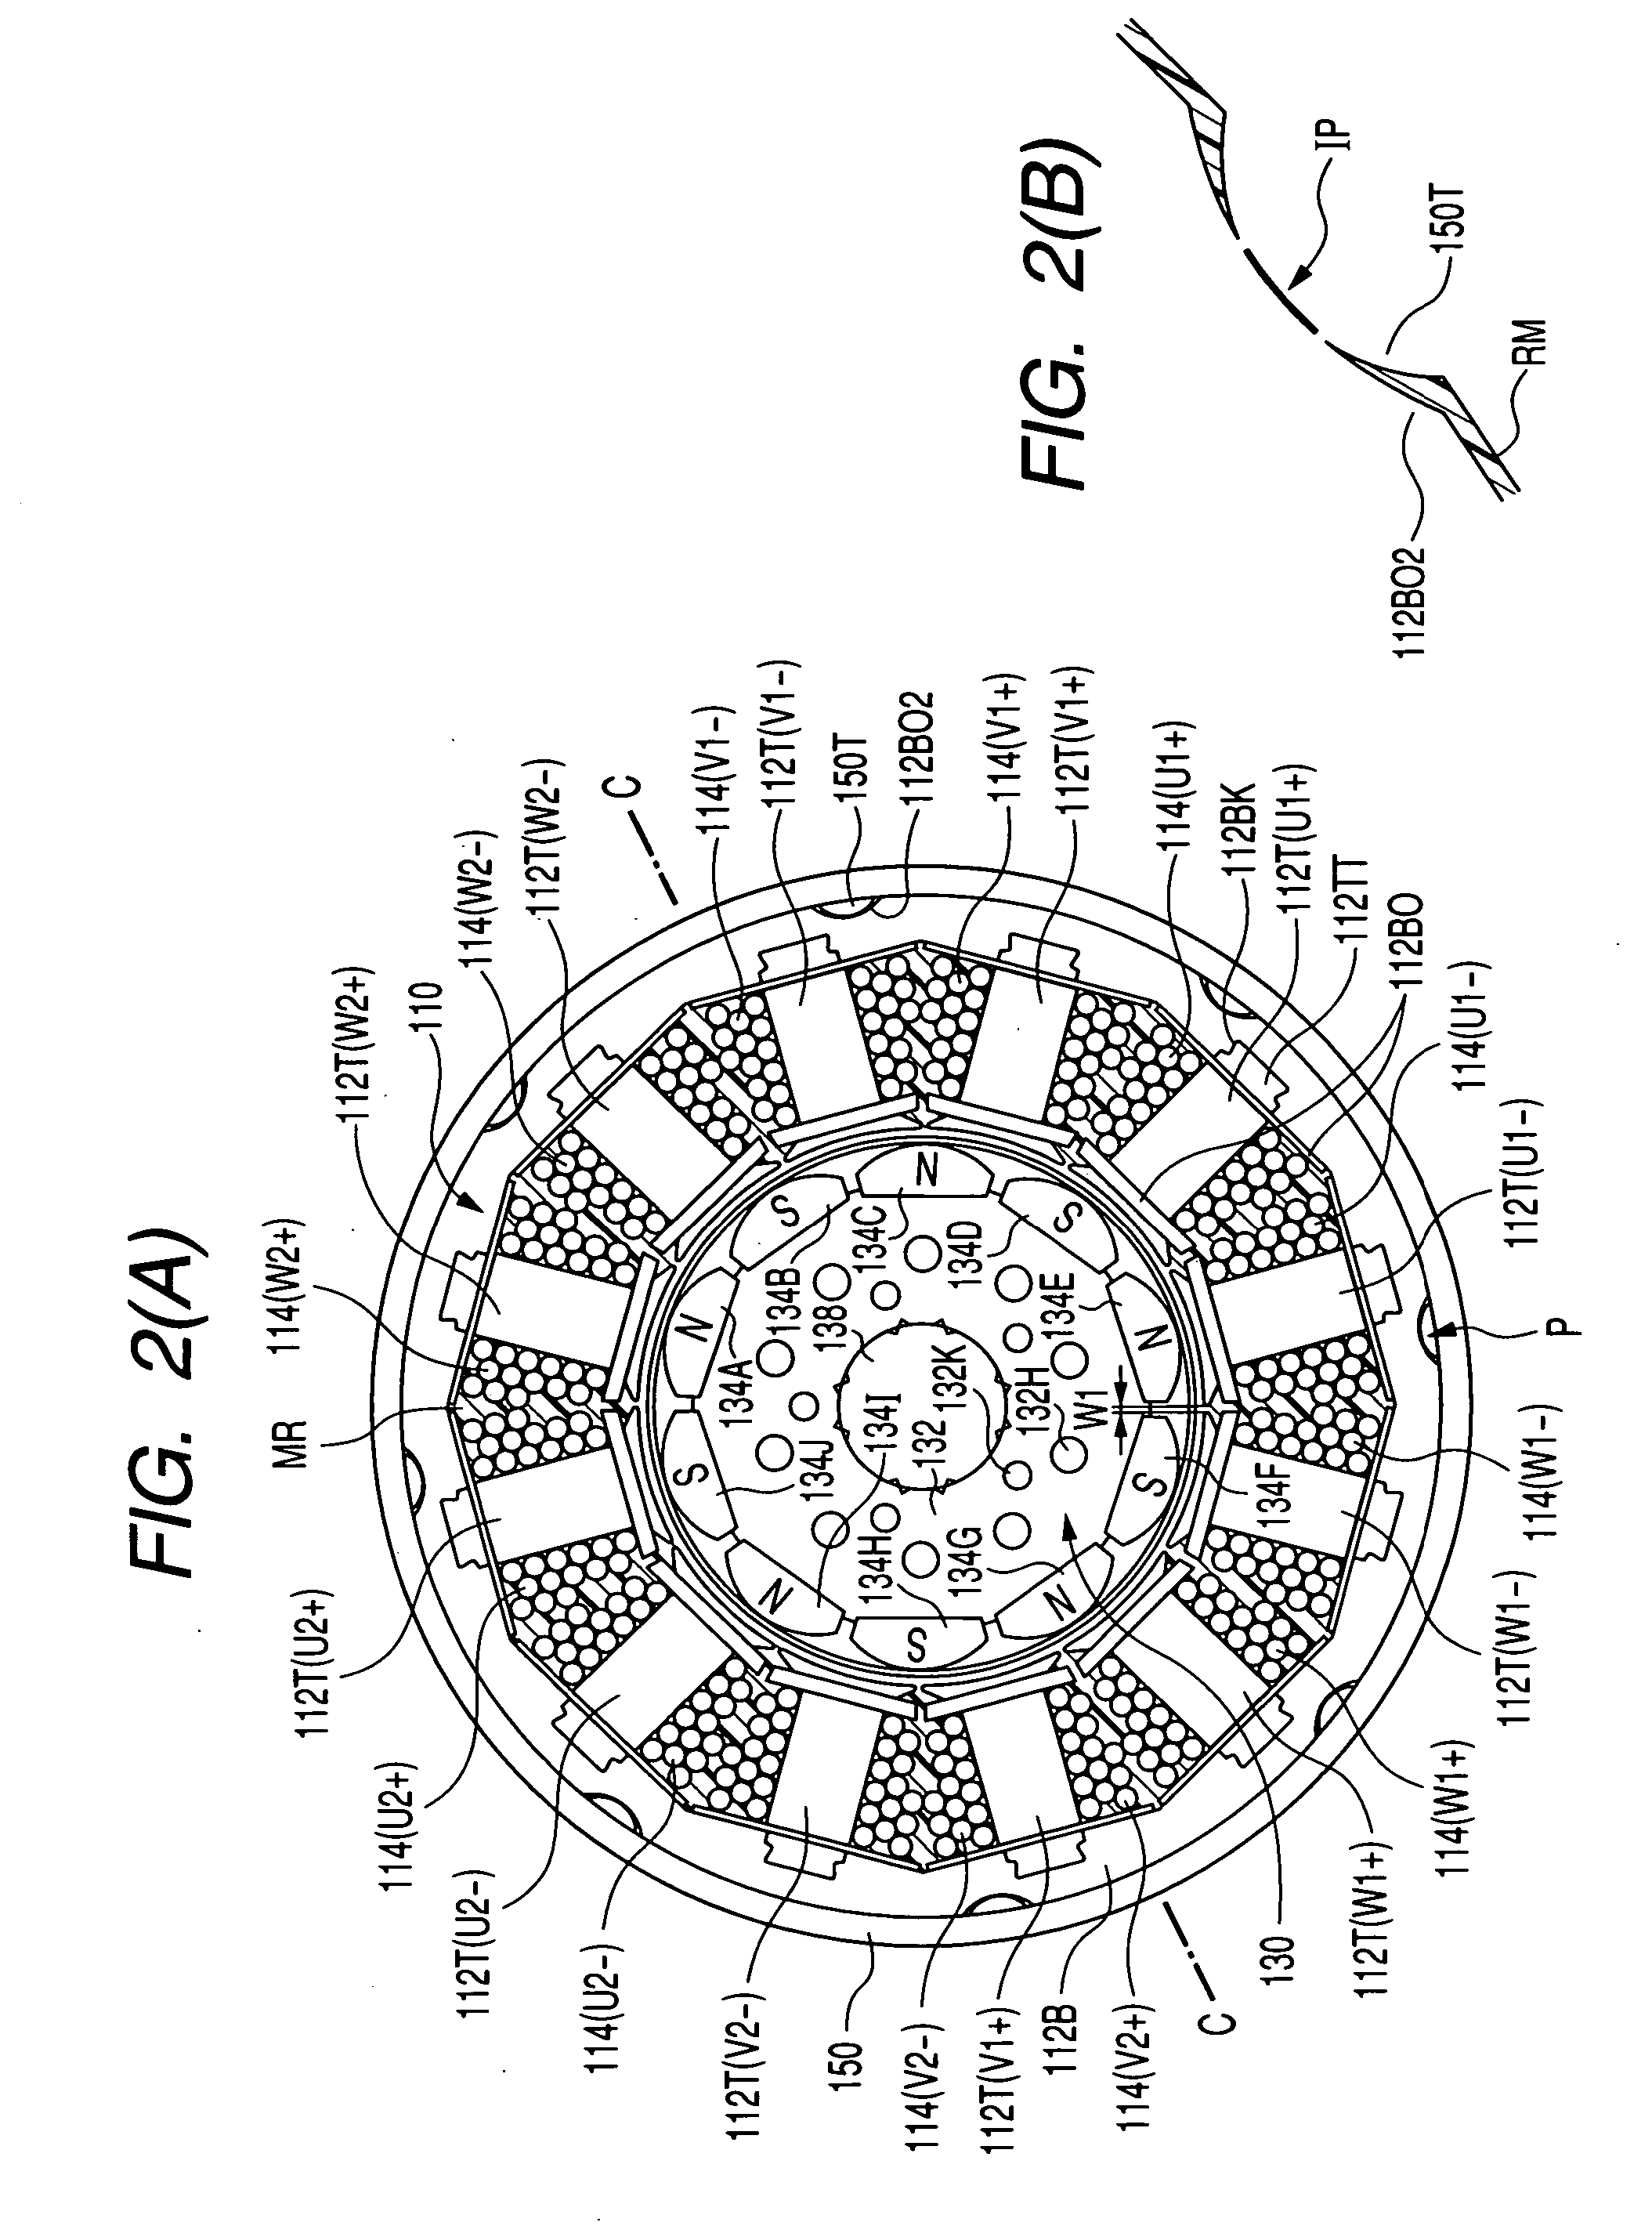 DC brushless motor for electrical power steering and the production method thereof